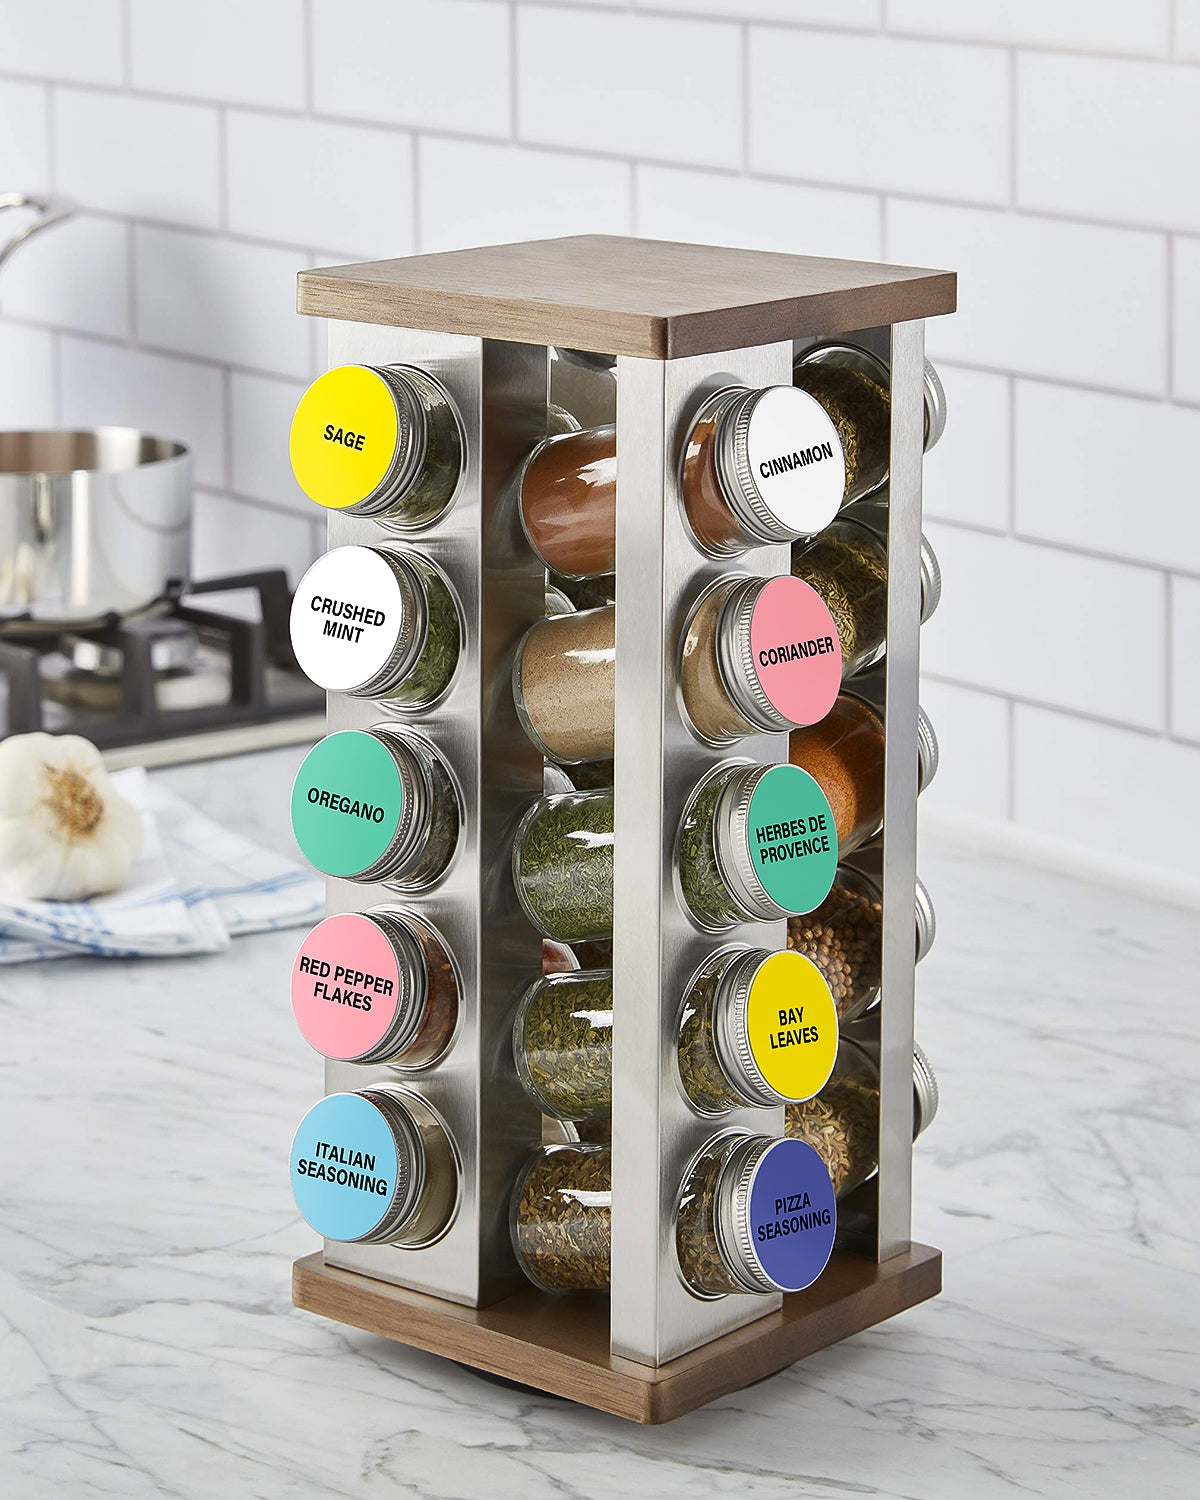 MUNBYN circle labels can be used to label jars as spice labels.